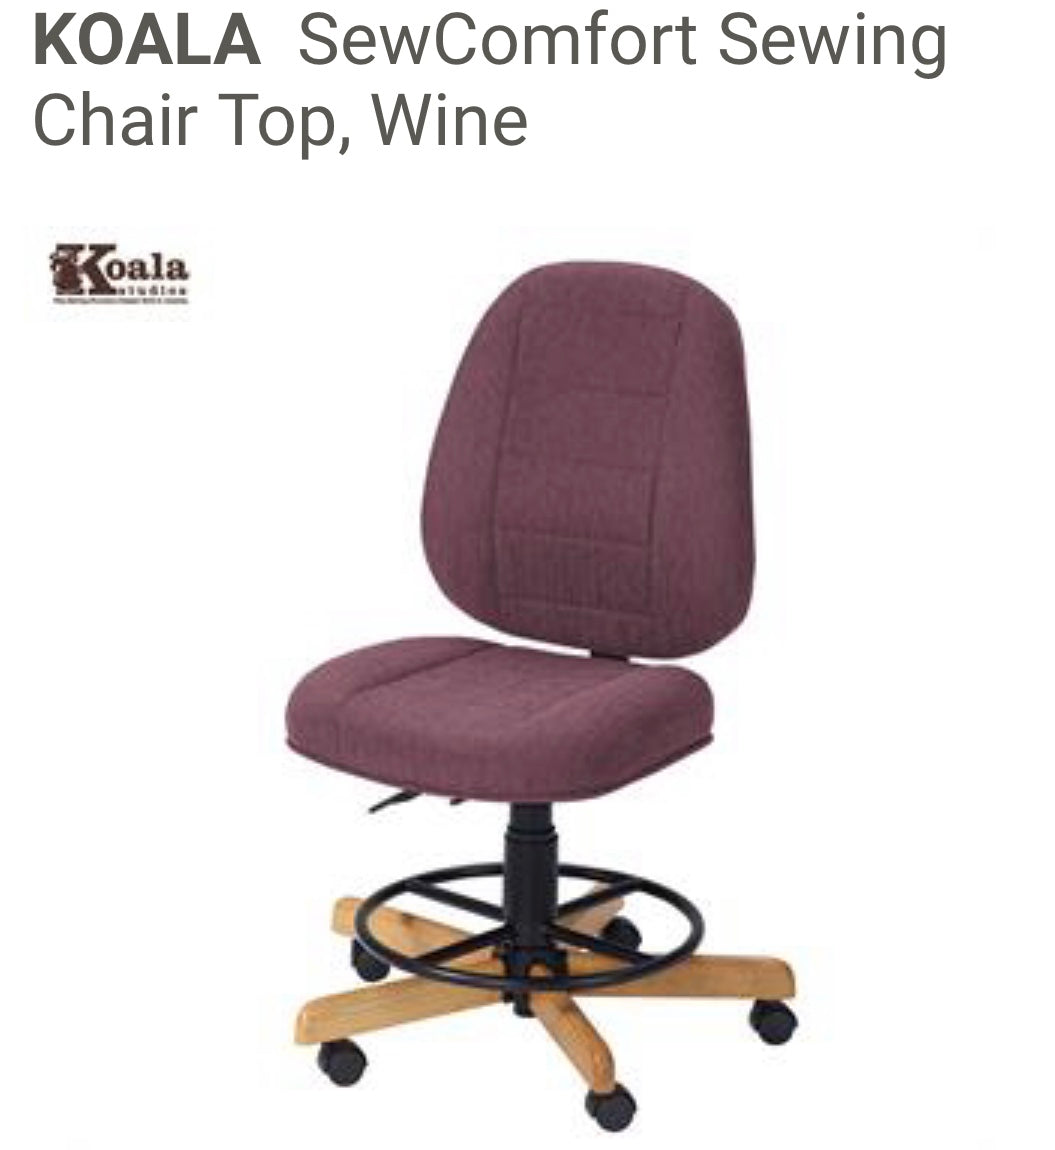 SewComfort Sewing Chair - Wine